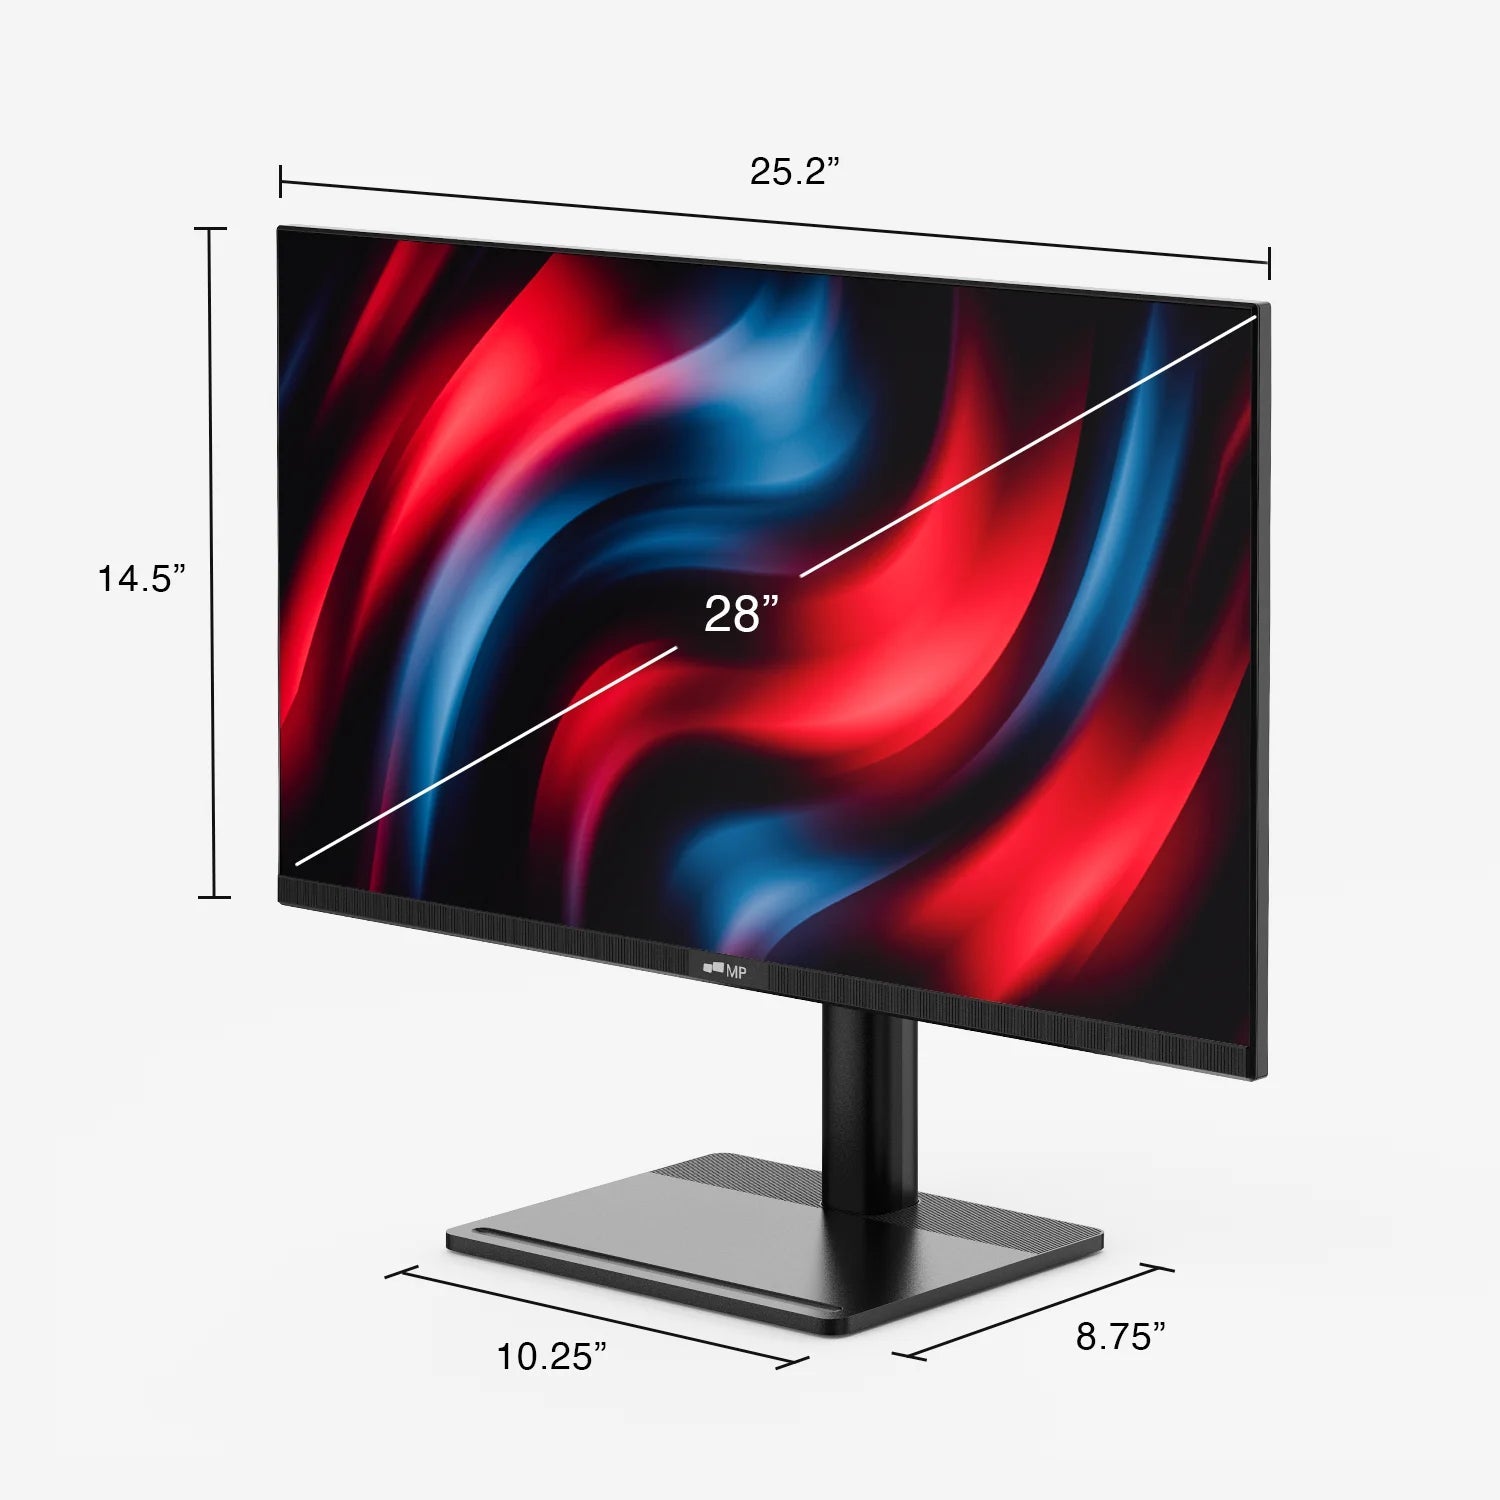 Size of MP 4k monitor